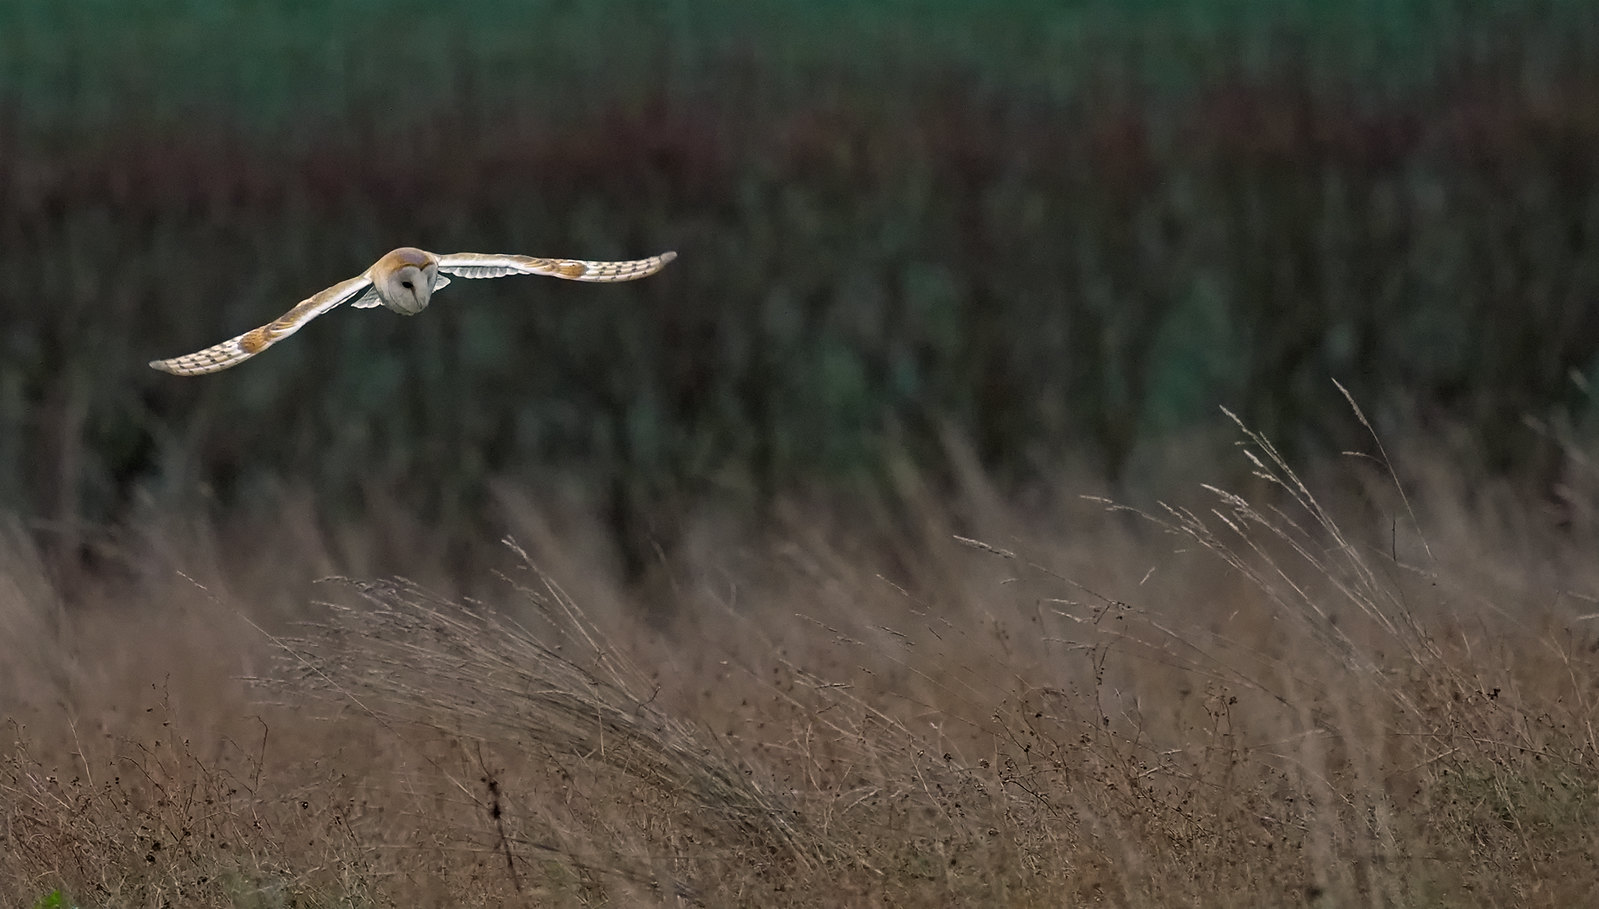 Barn Owl - difficult light, but not too bad.